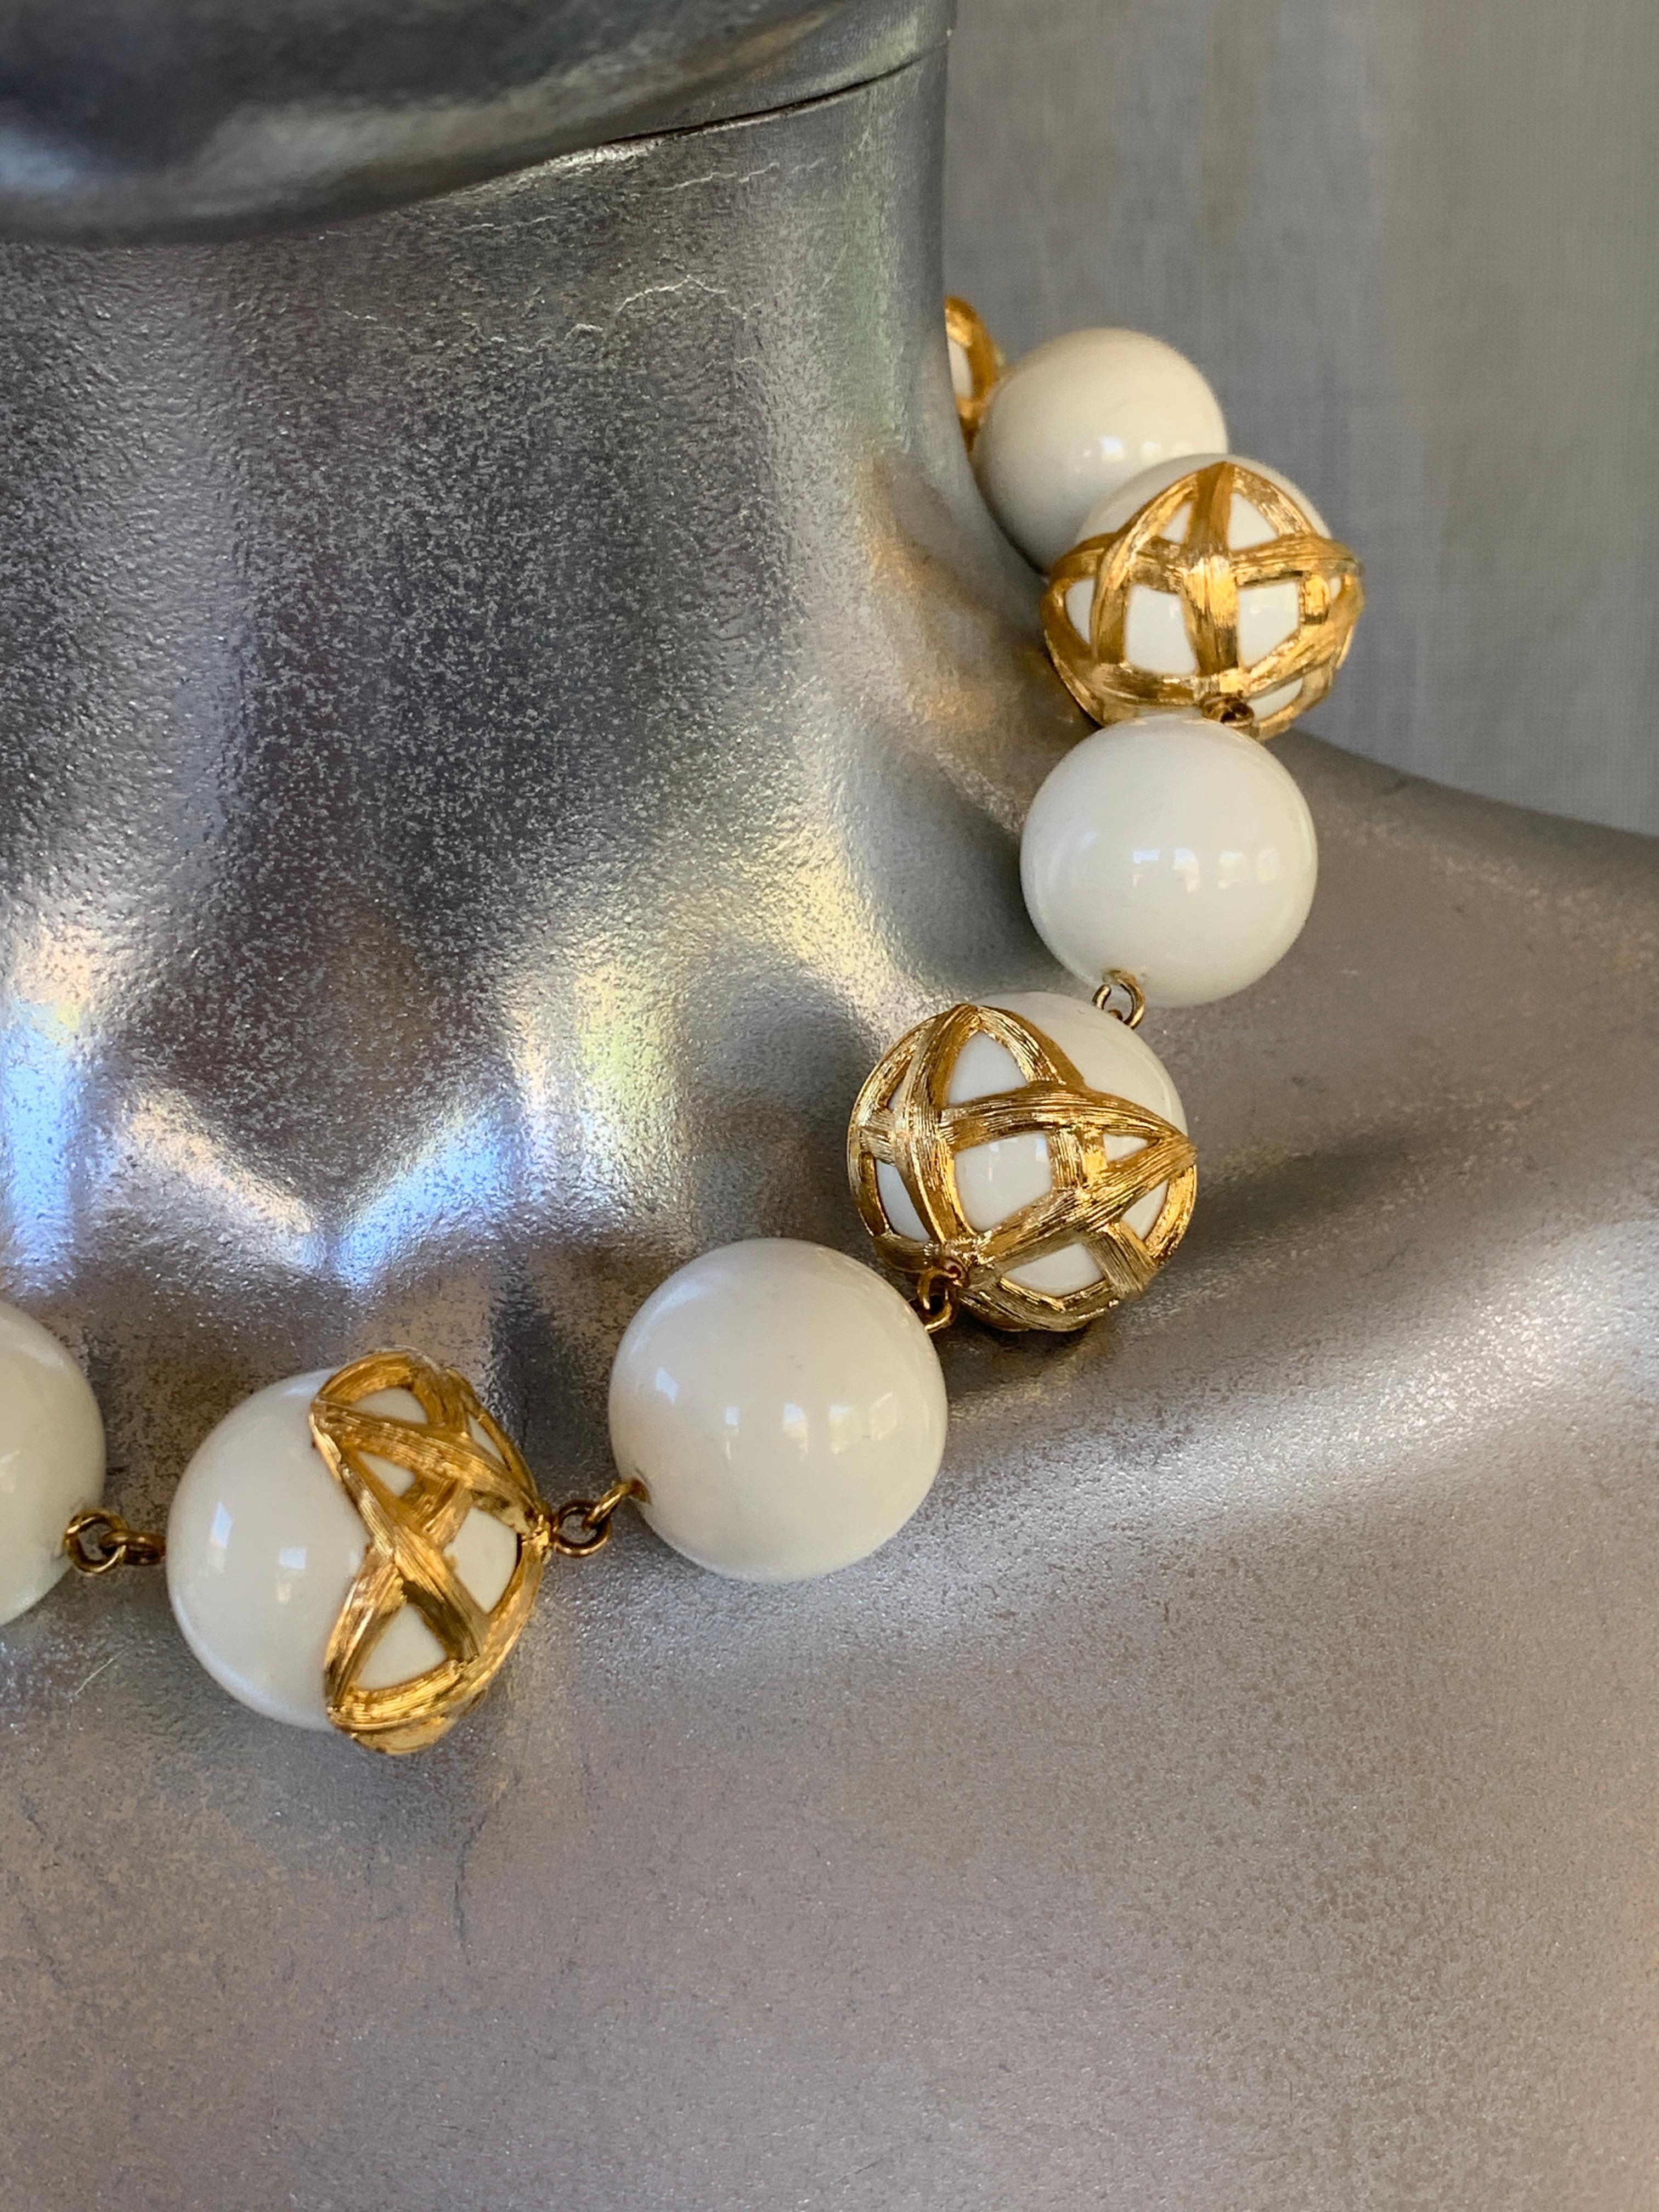 This necklace is as timeless and glamorous as when it was designed. Monet did some really beautiful jewelry in the 70s and 80s. This upscale piece is one of the best we have seen. White spheres (look like ceramic balls) have this peautiful detail.